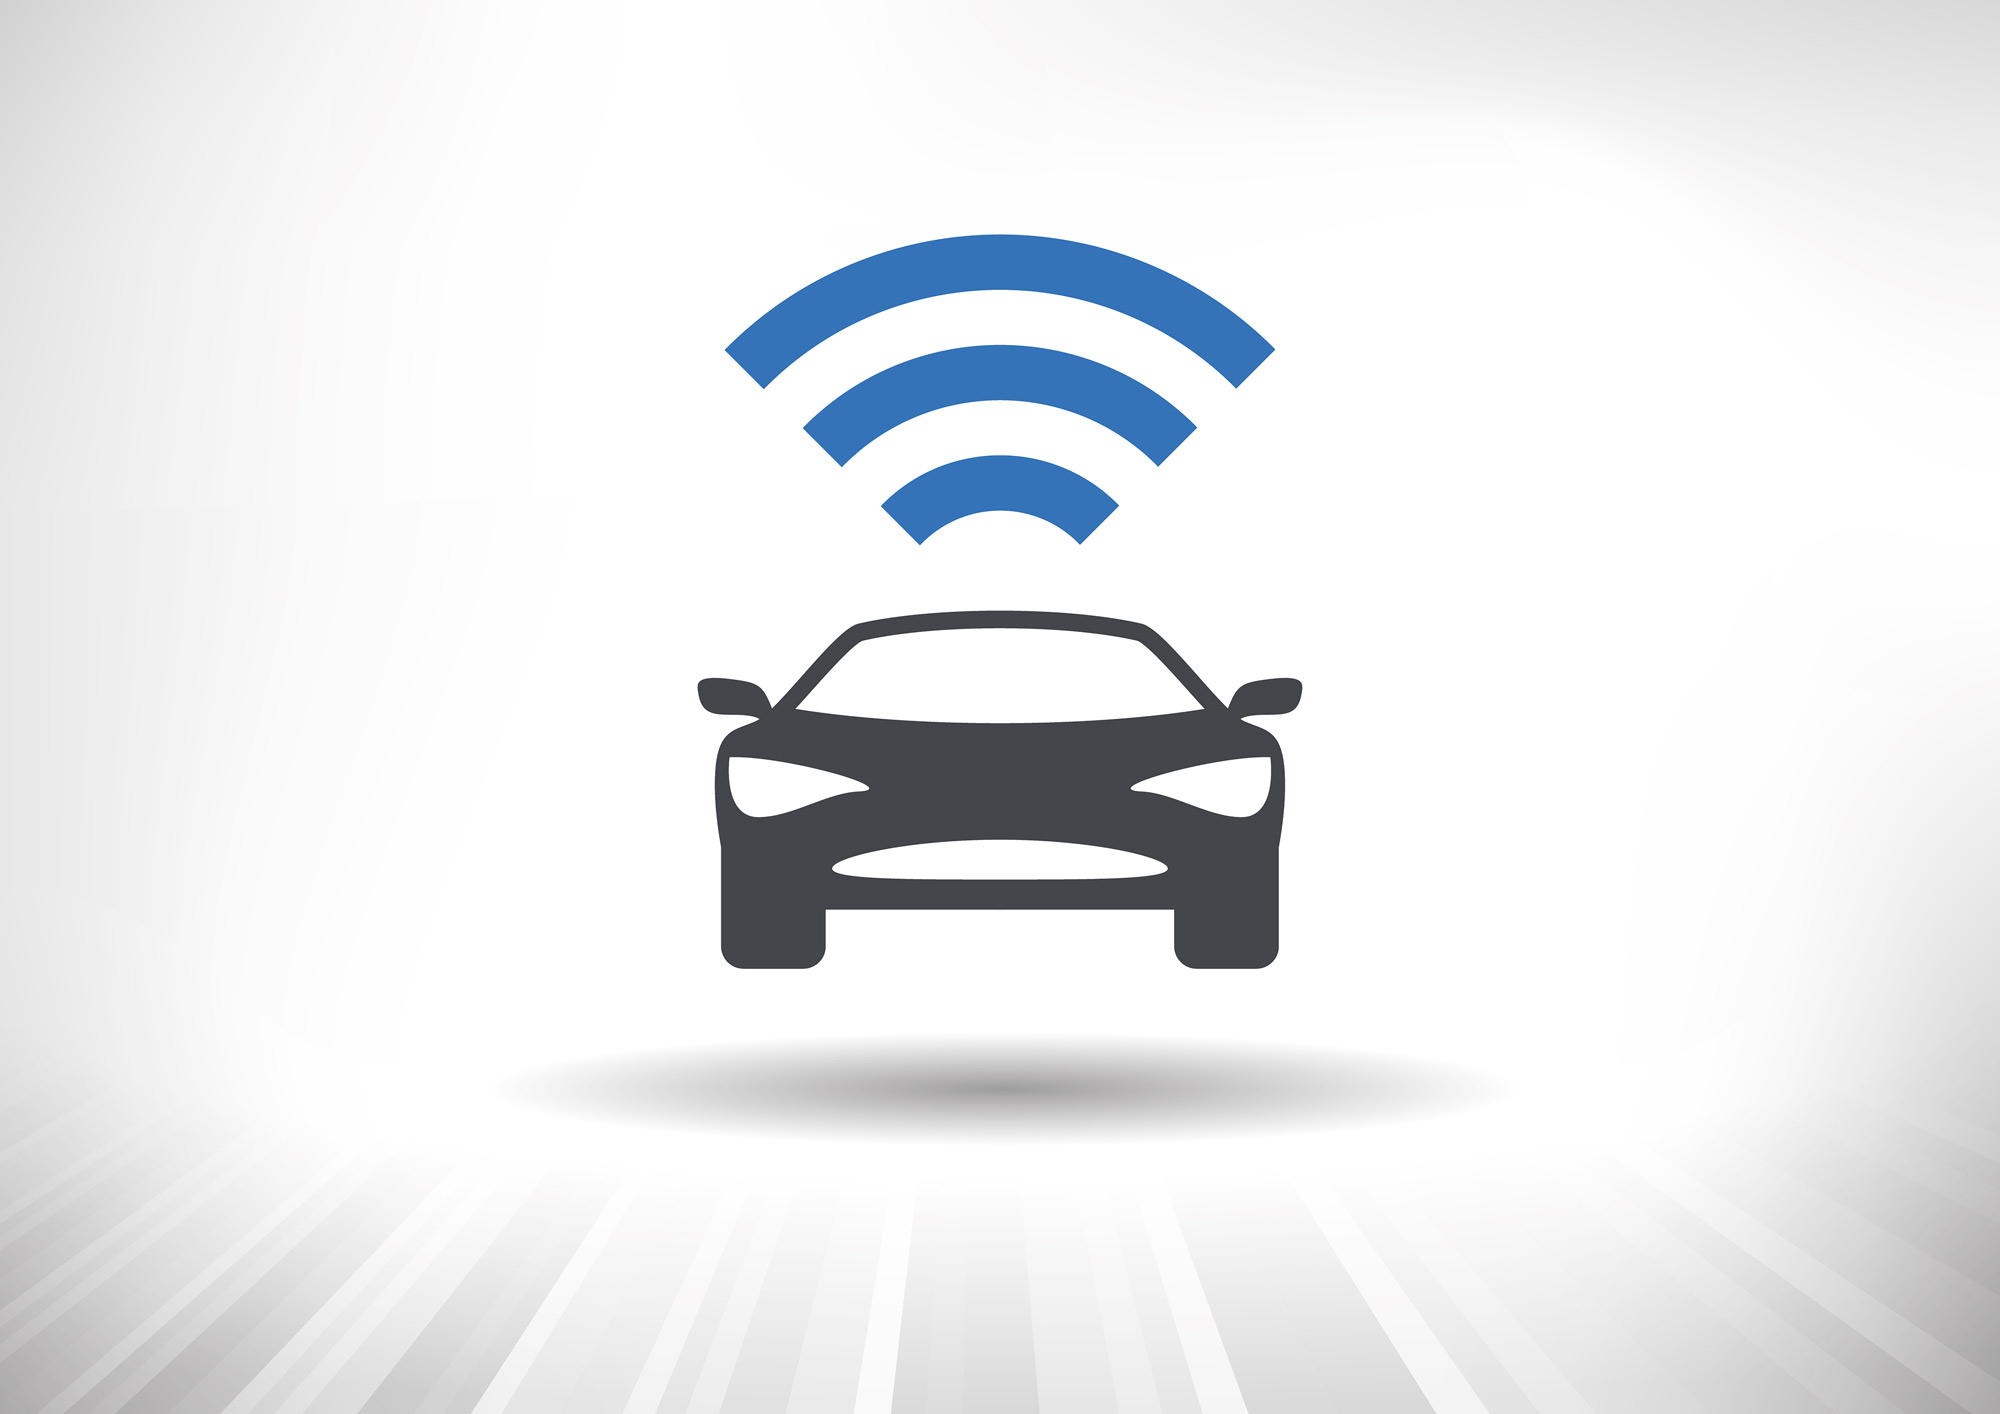 Connected car wifi